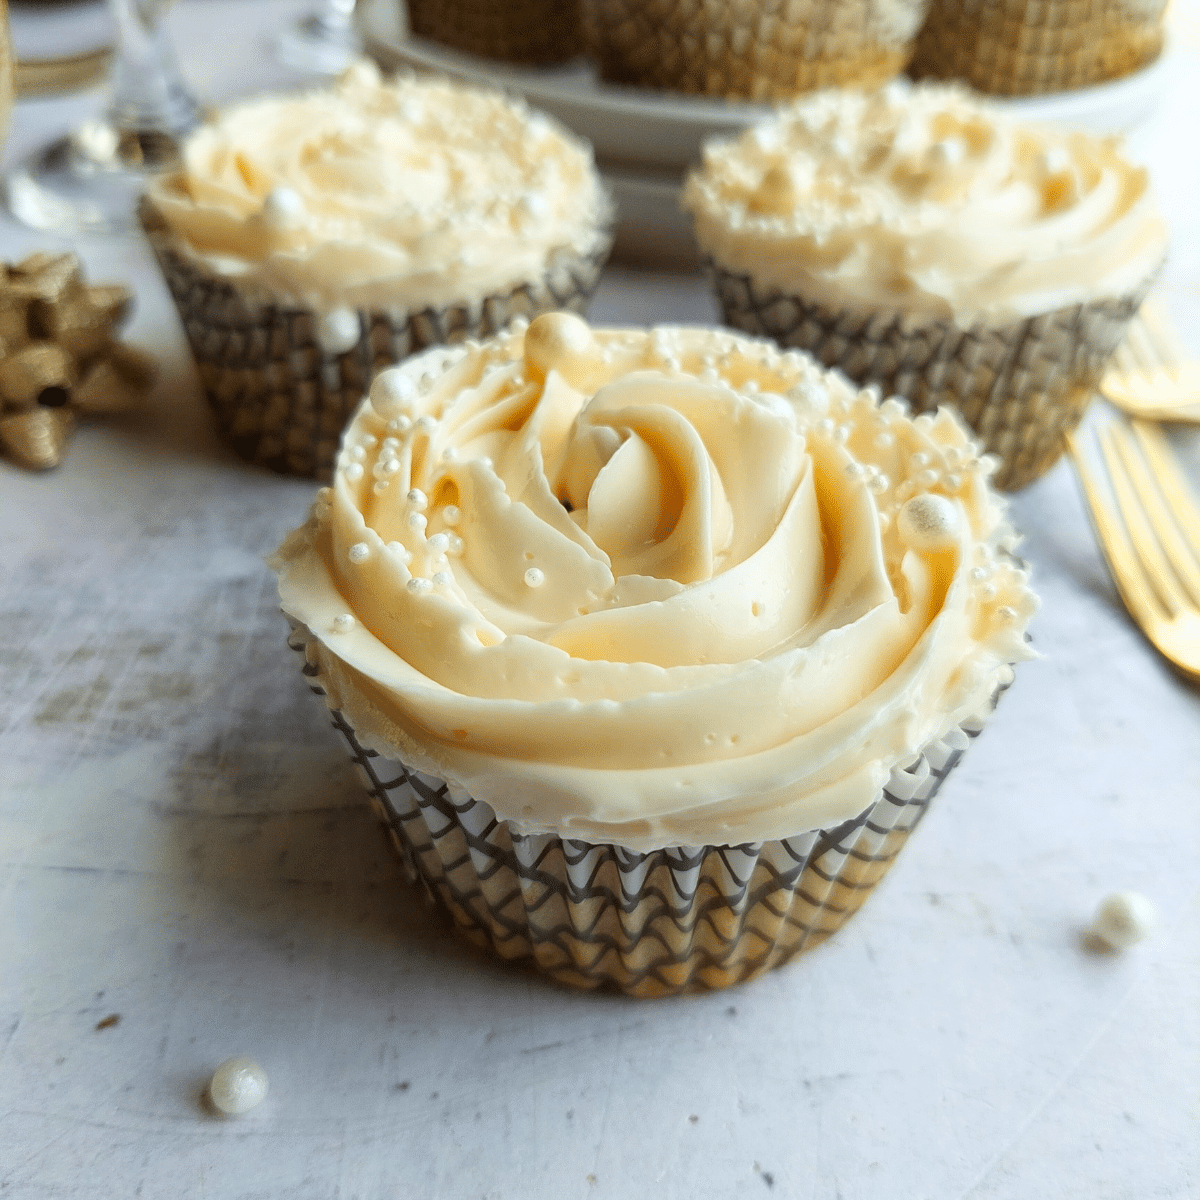 These cupcakes are a perfect blend of non-alcoholic sparkling wine in both the batter and the luscious buttercream topping.